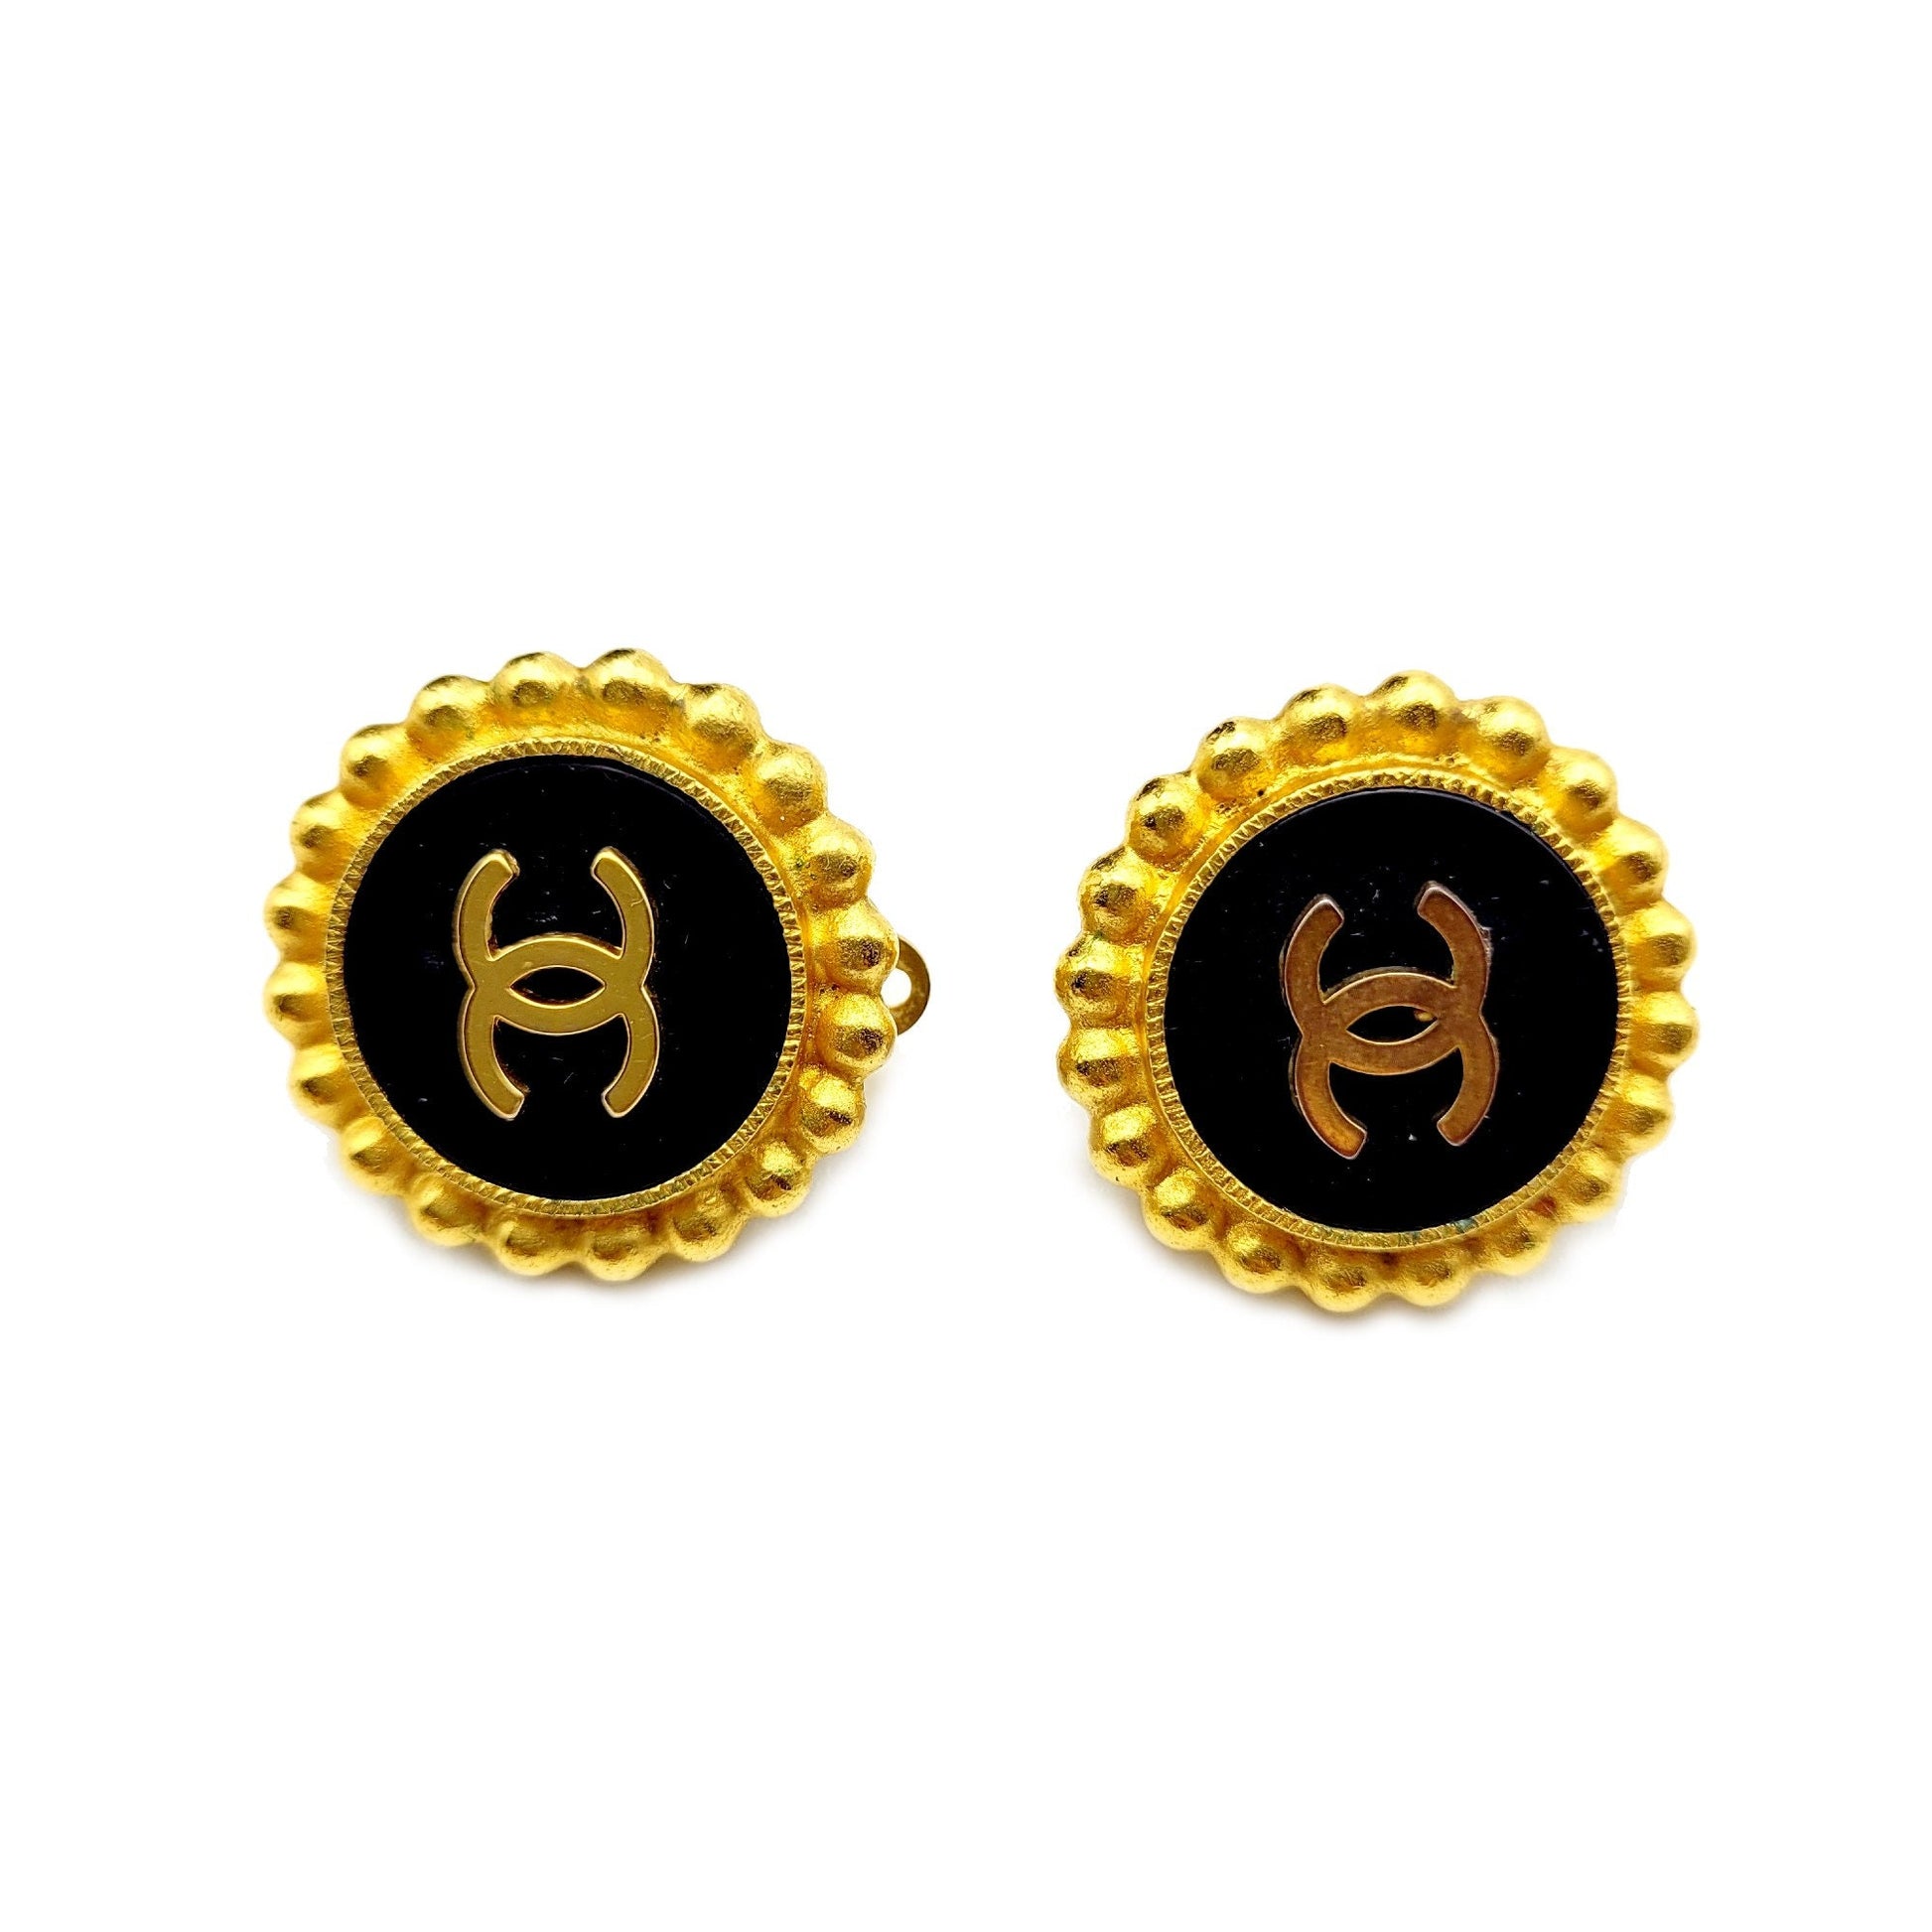 Authentic vintage Chanel earrings gold CC small round clip on real